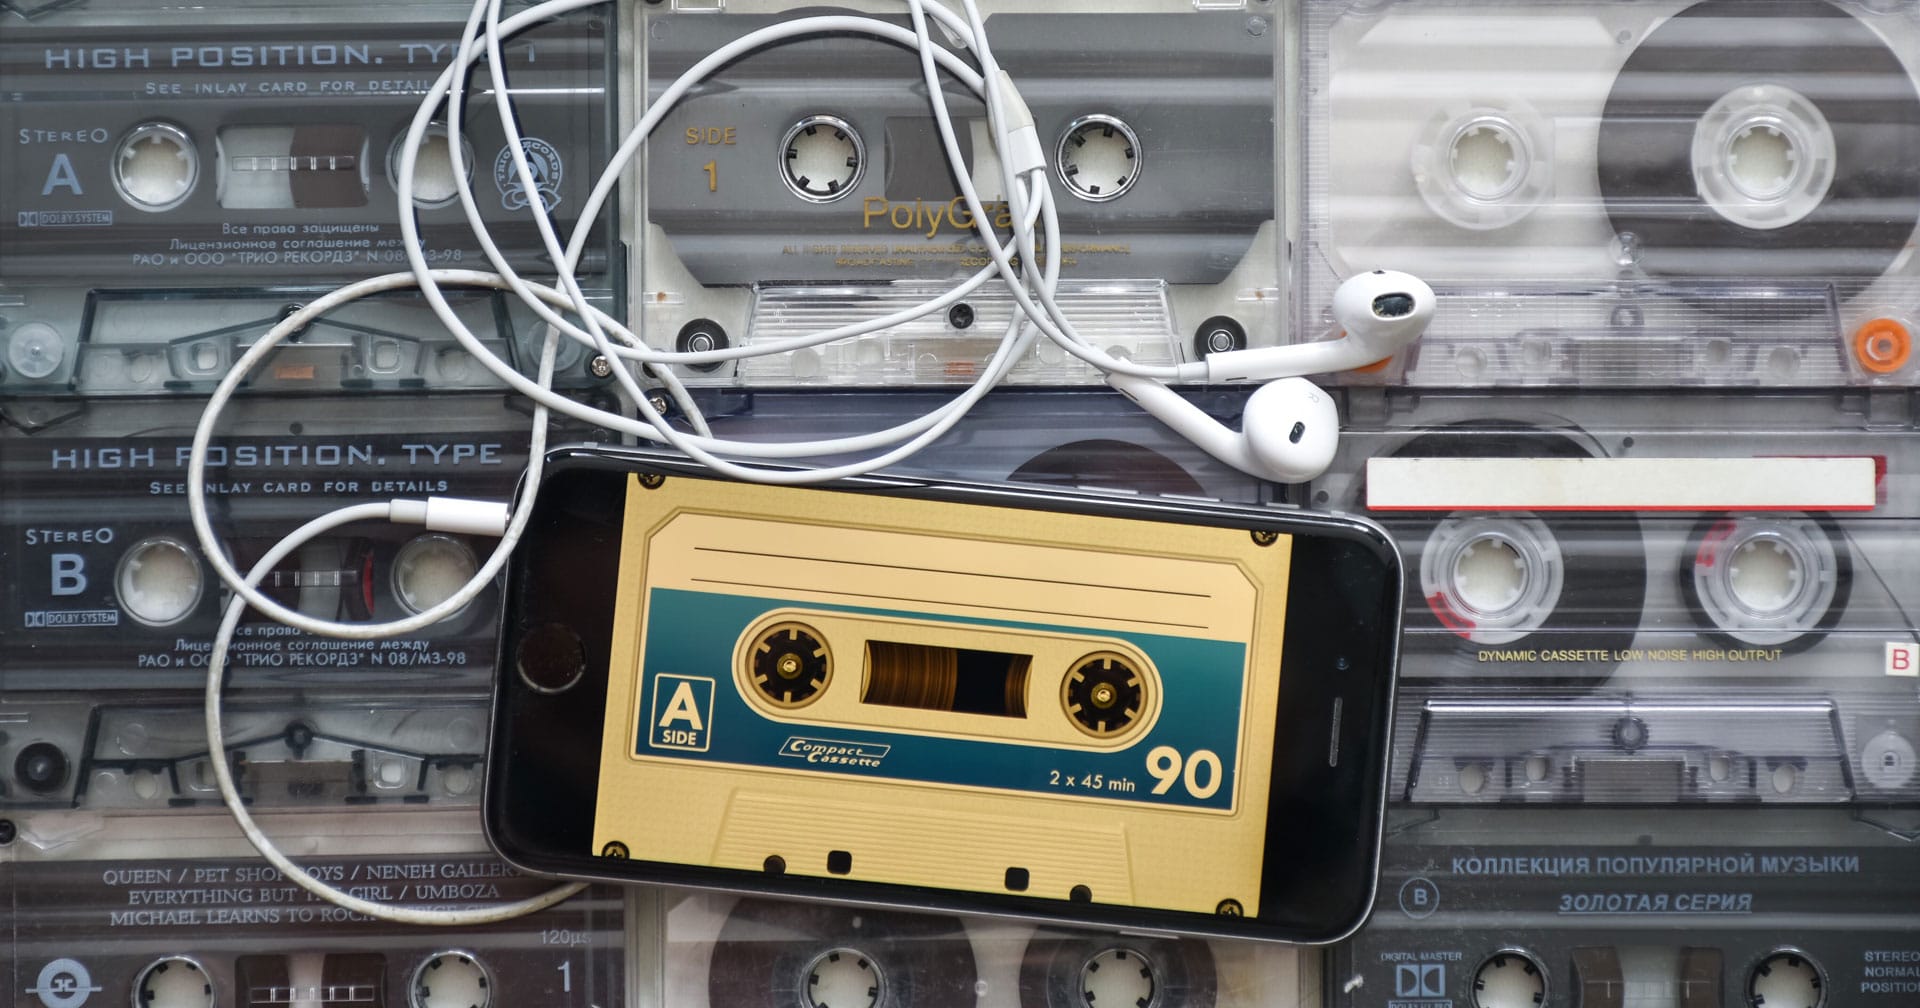 3 updated reasons for using odd numbered lists in your blog post titles - image of cassette on iPhone. Photo by Vadim ZH on Reshot